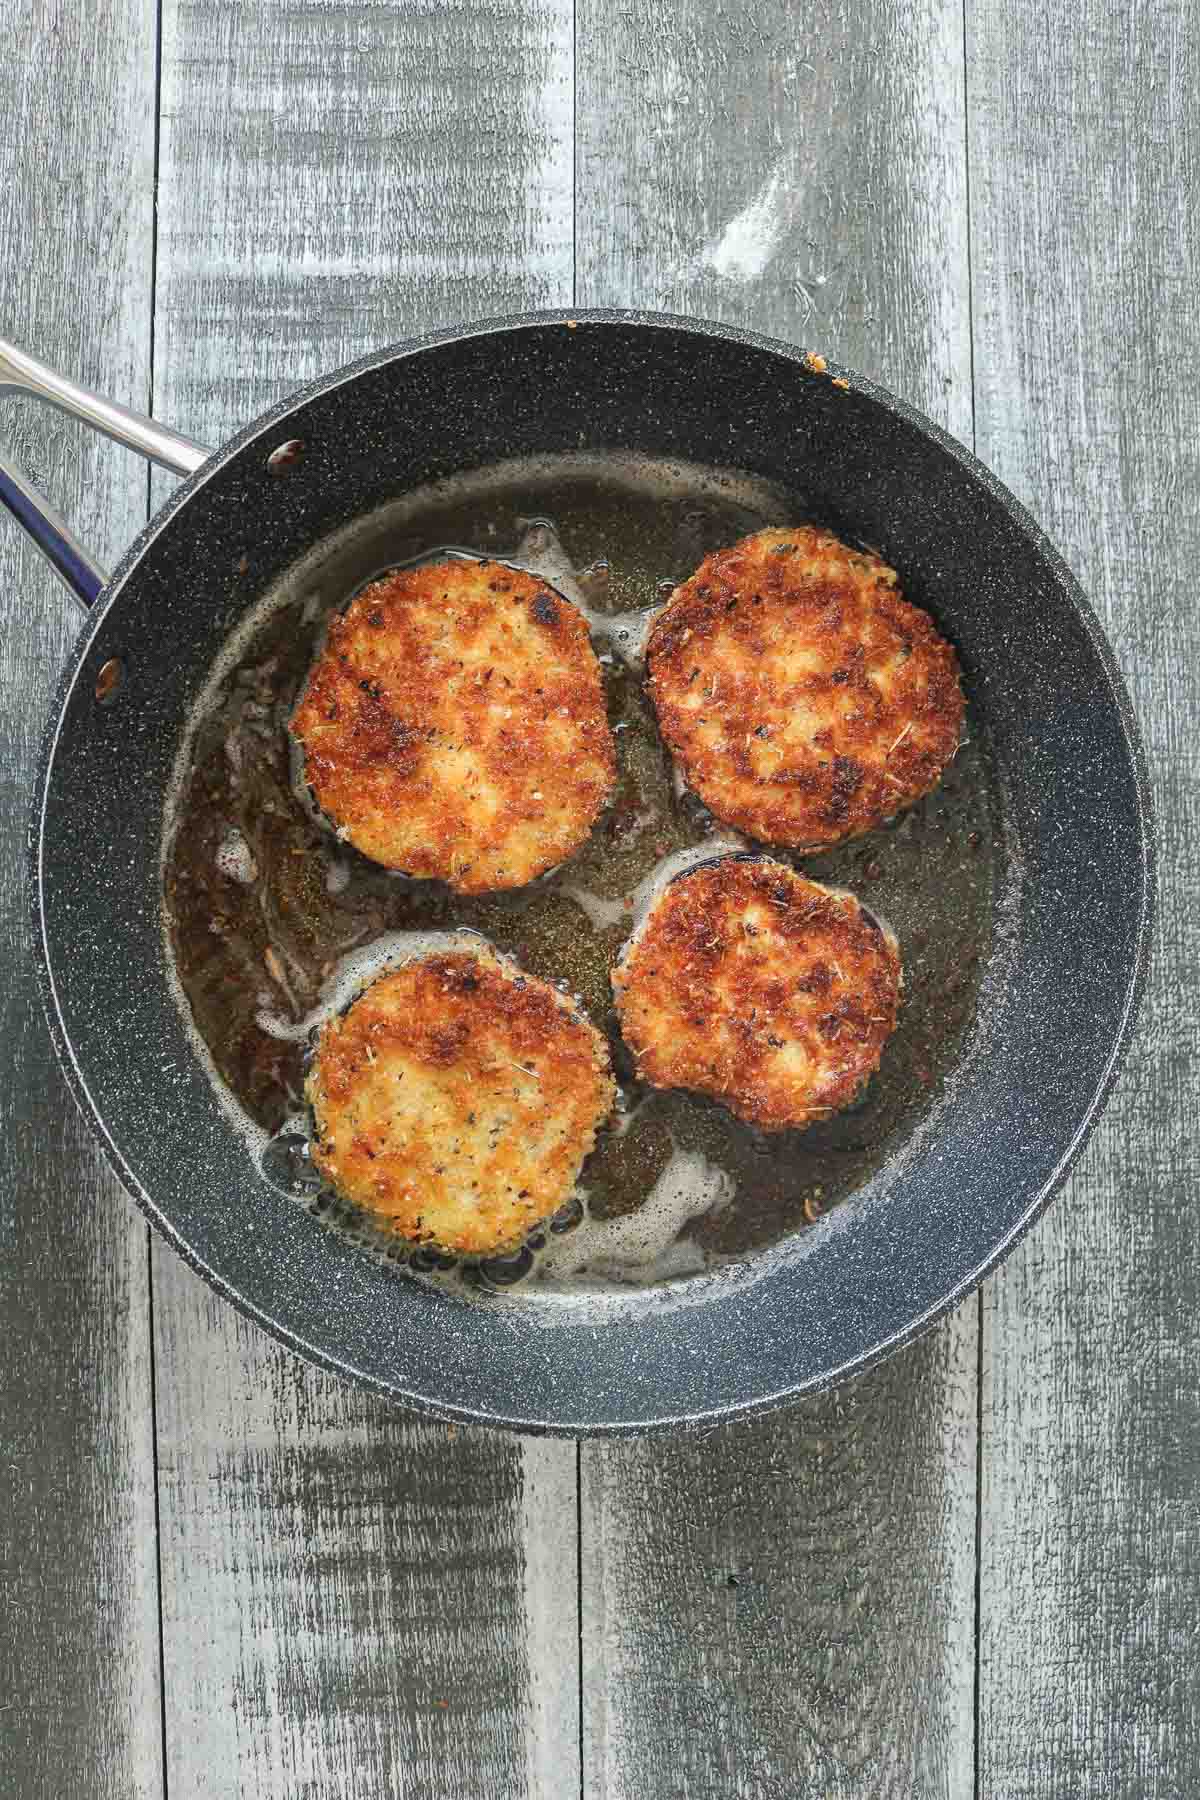 Four crispy breaded eggplant slices frying in a pan.